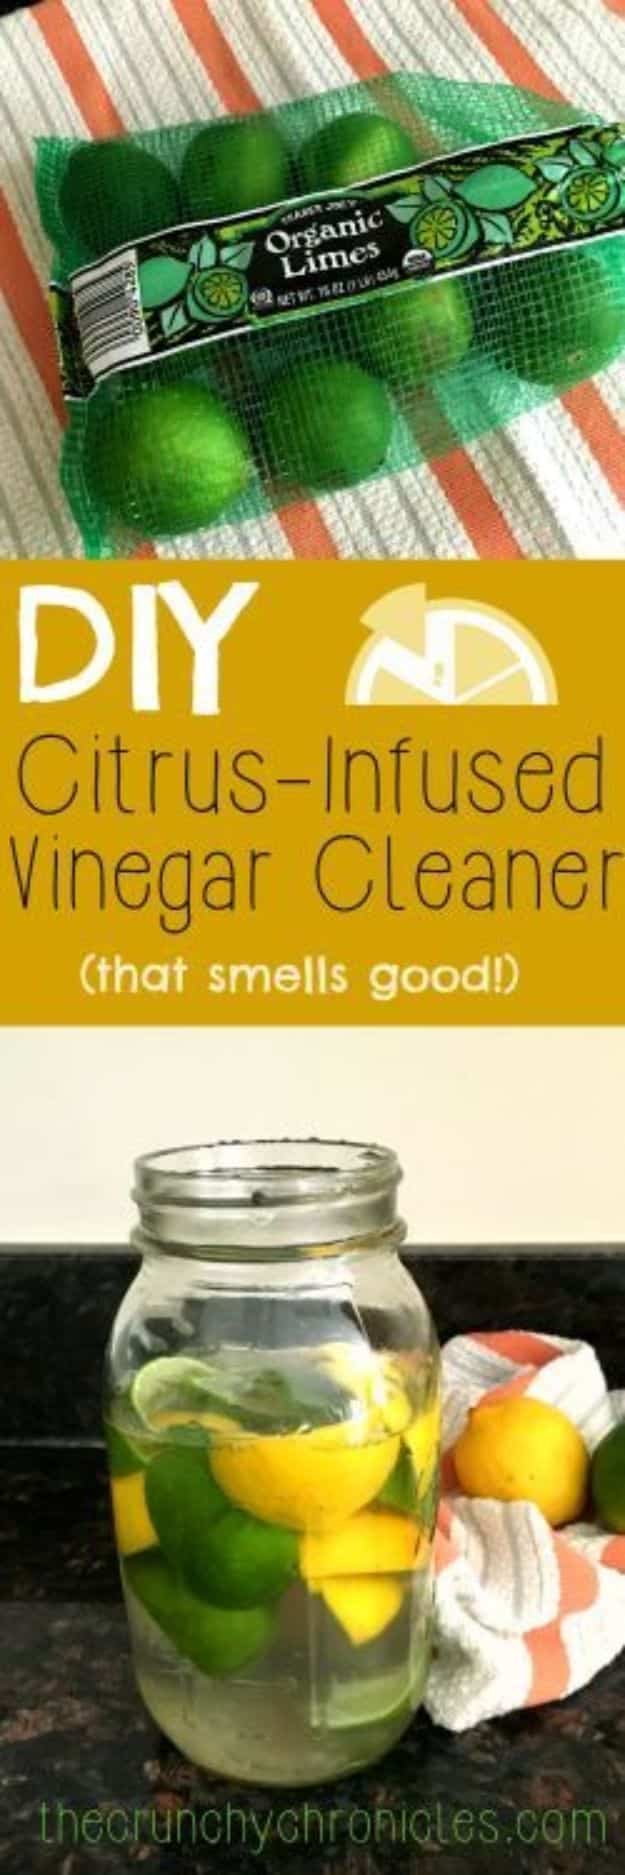 Homemade Cleaning Products - DIY Citrus Infused Vinegar Cleaner That Smells Good - DIY Cleaners With Recipe and Tutorial - Make DIY Natural and ll Purpose Cleaner Recipes for Home With Vinegar, Essential Oils